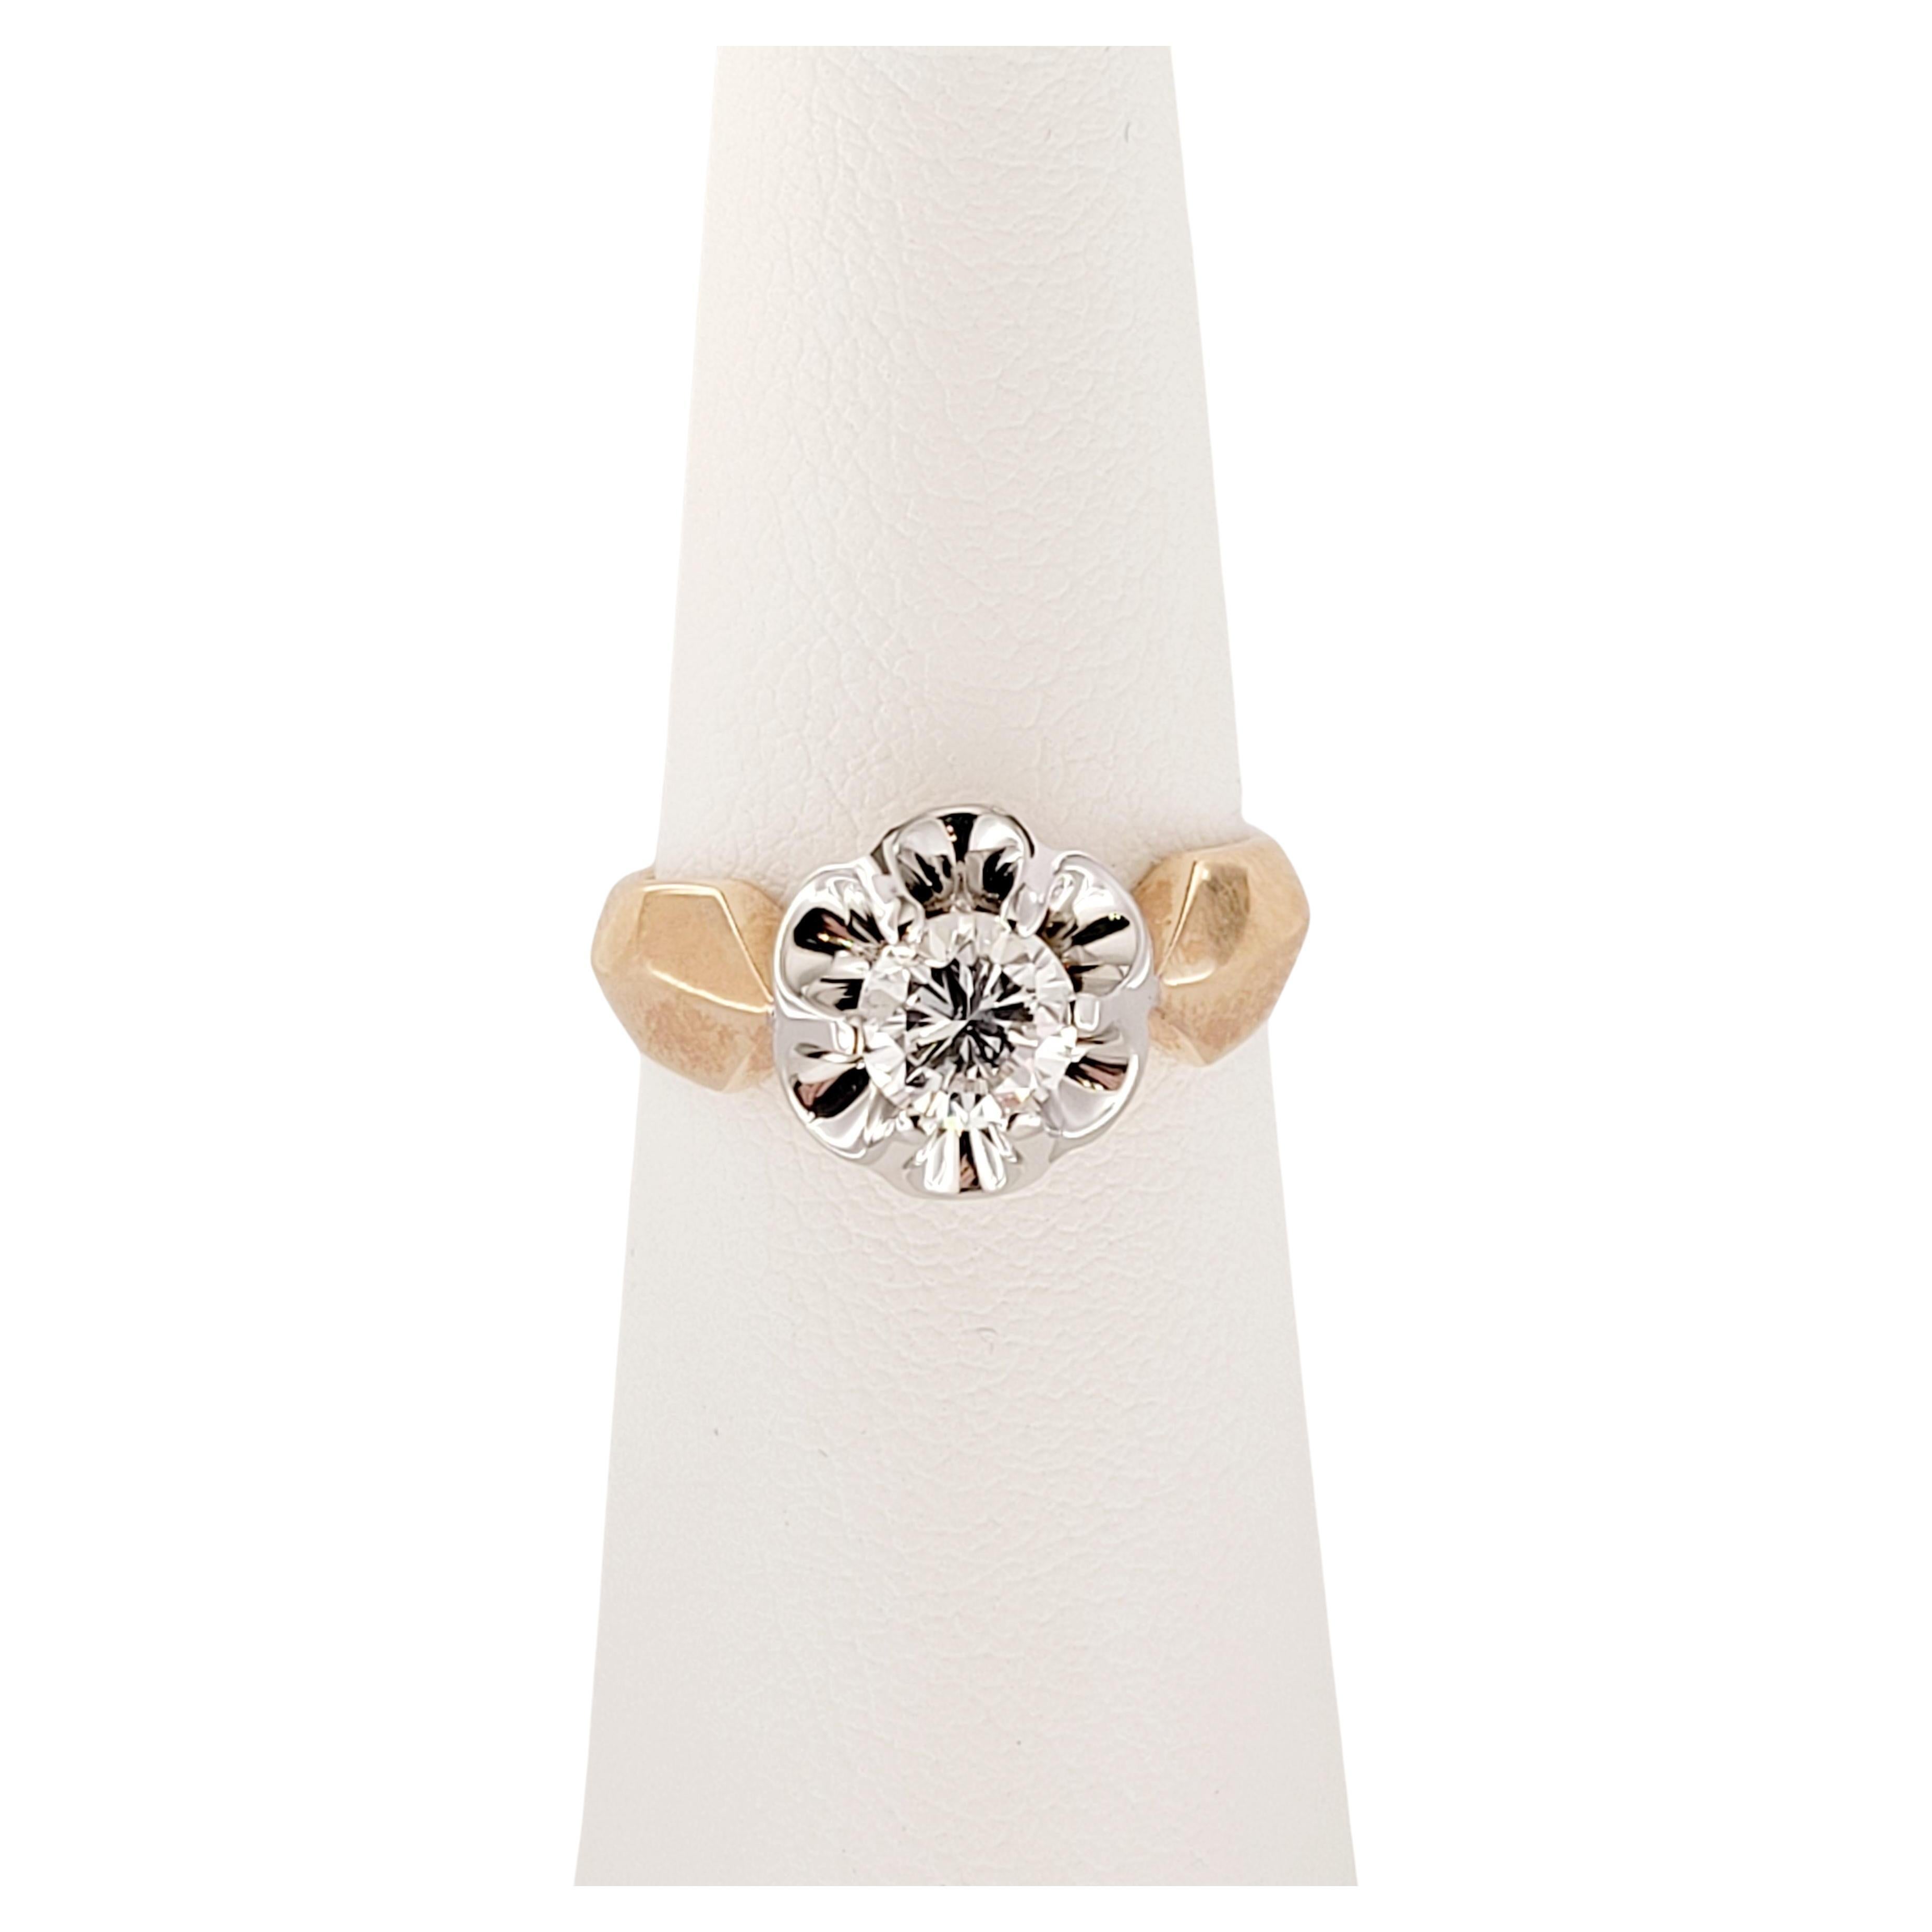 Vintage European Style Solitaire 1 ct Diamon Ring in 14K Rose Gold and Palladium